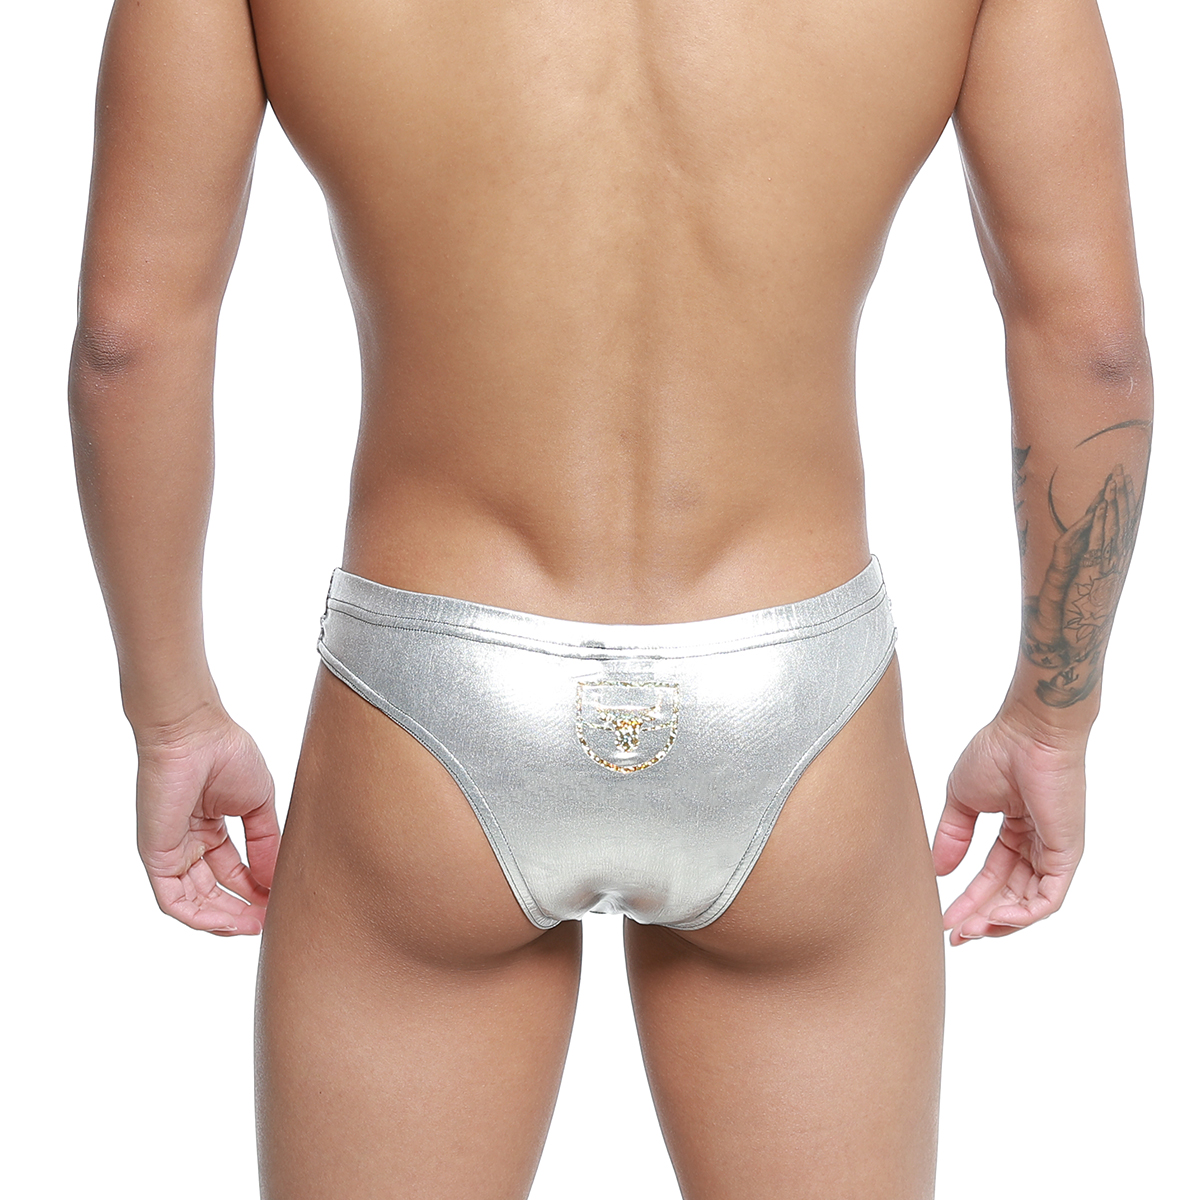 [MetroMuscleWear] Jupiter Competition Suit Silver (4974-89)